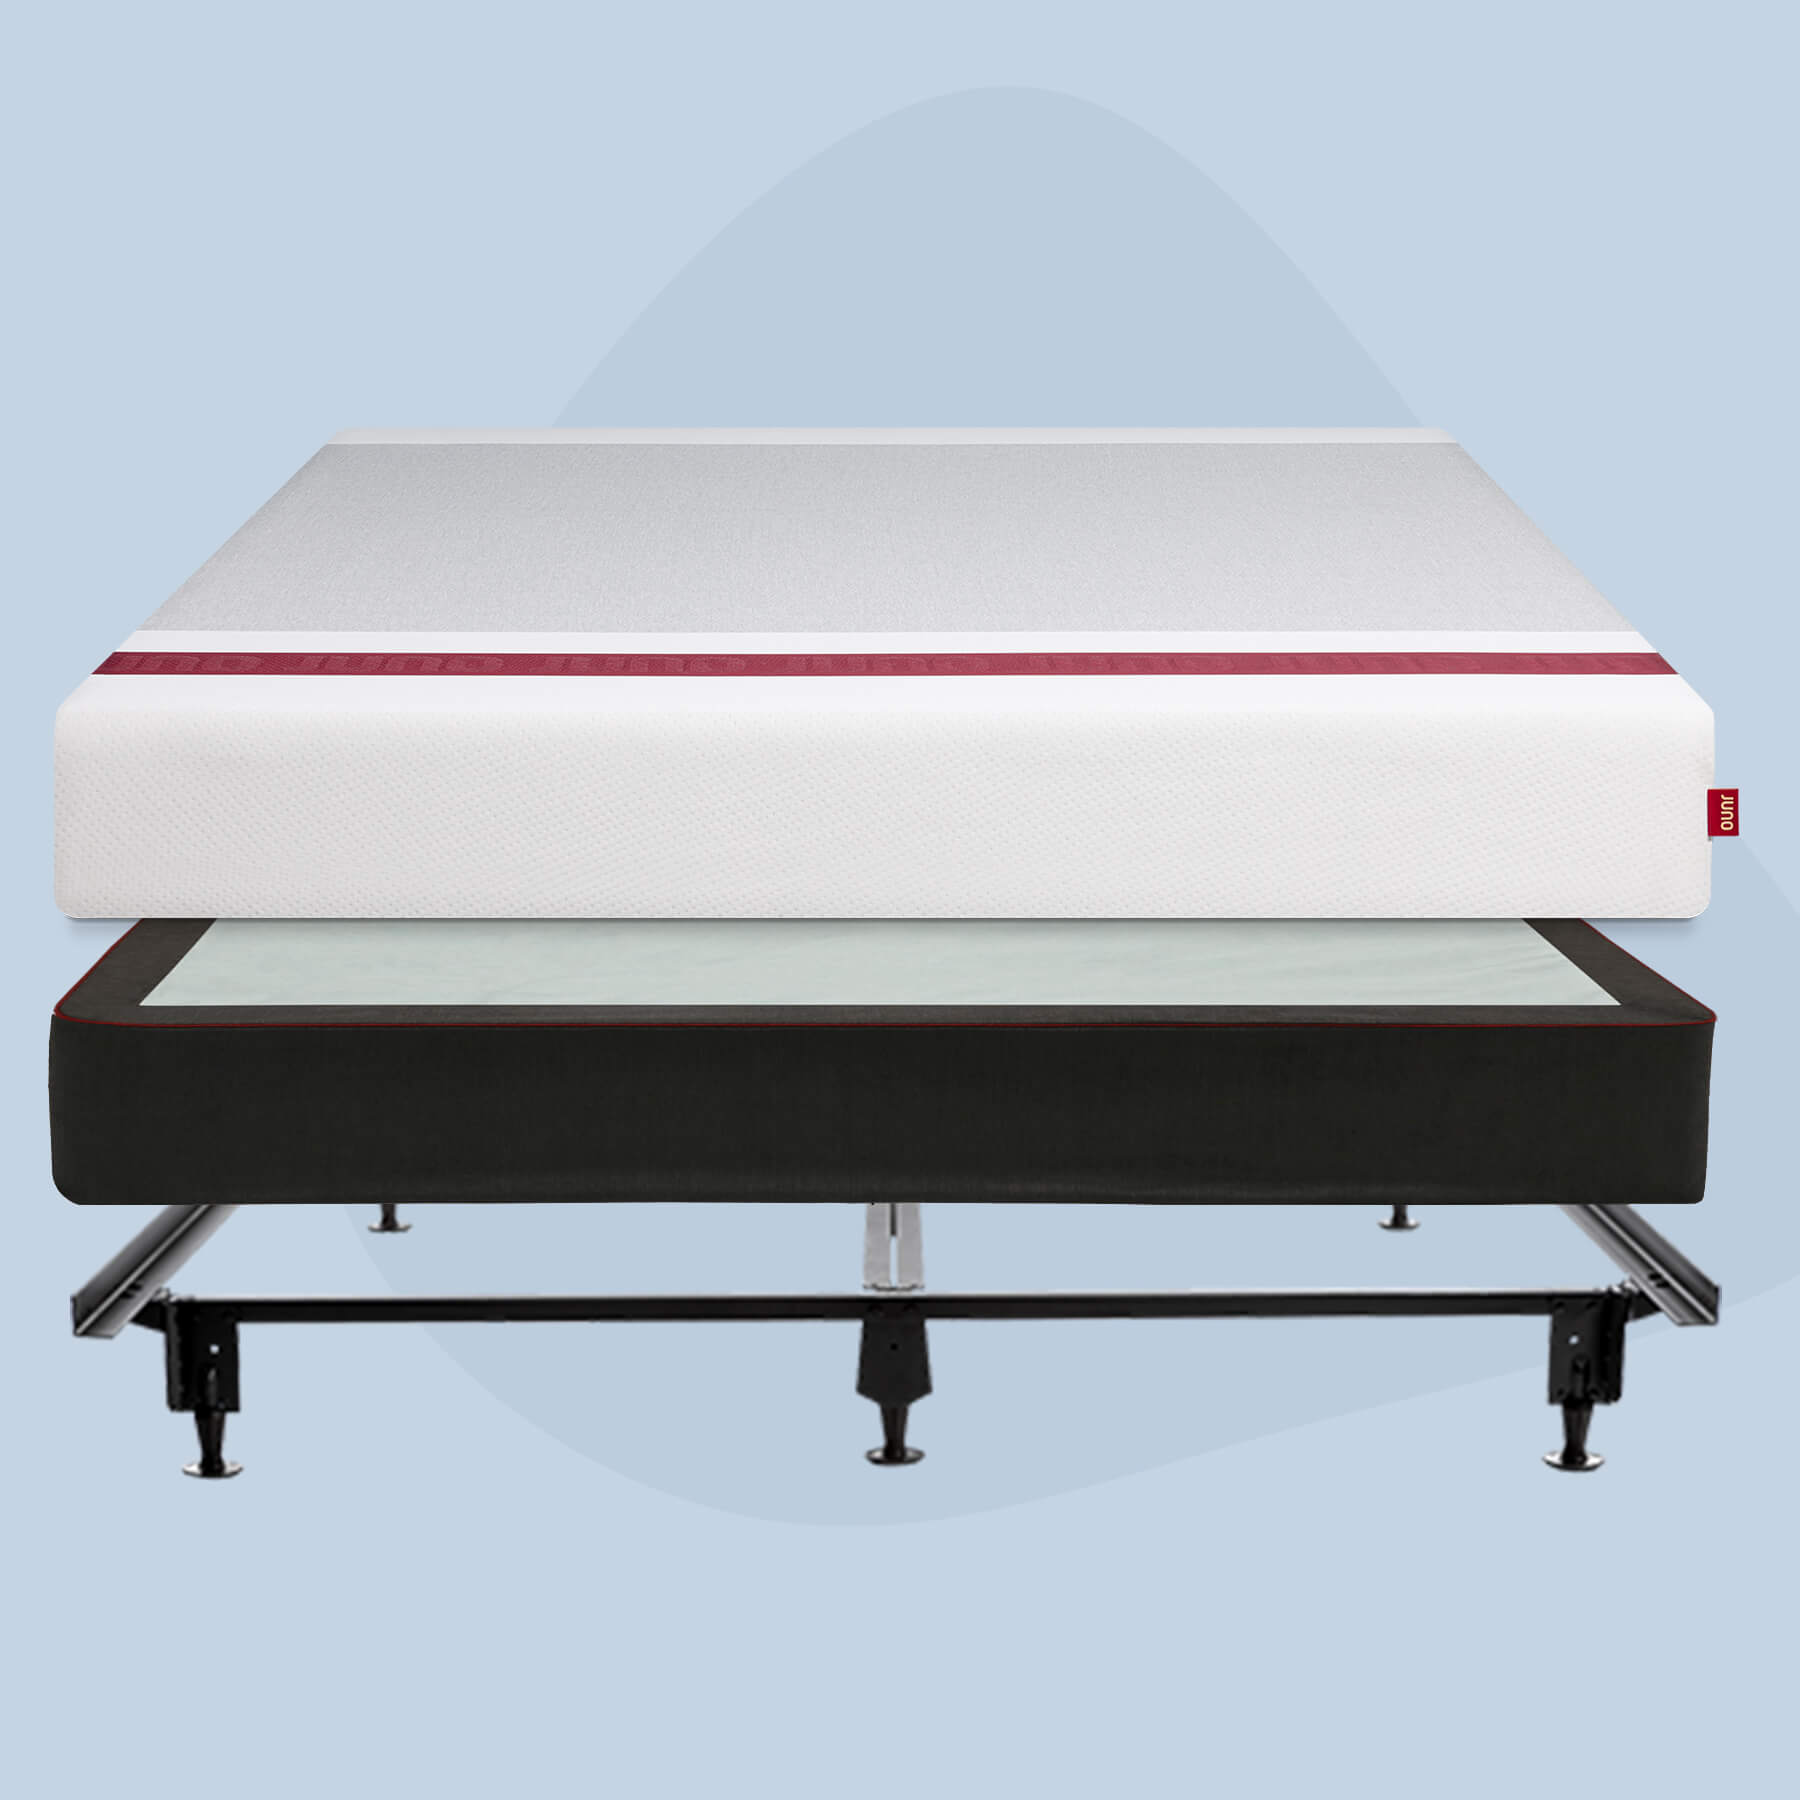 Juno mattress stacked on top of a foundation and metal bed frame